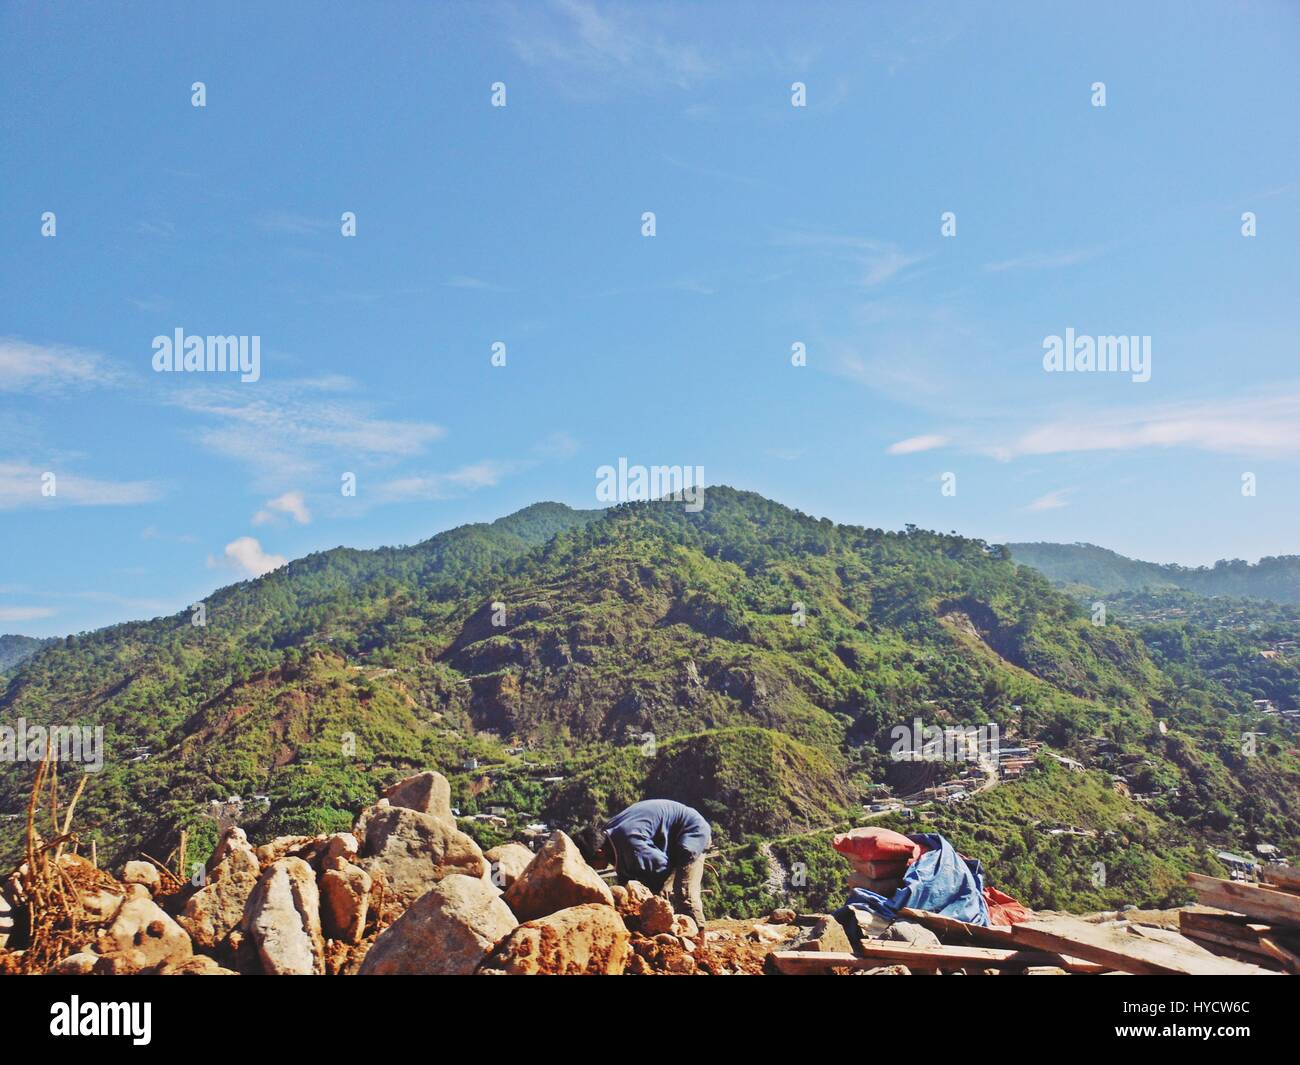 View of mountains with clear skies with a man working in the foreground Stock Photo